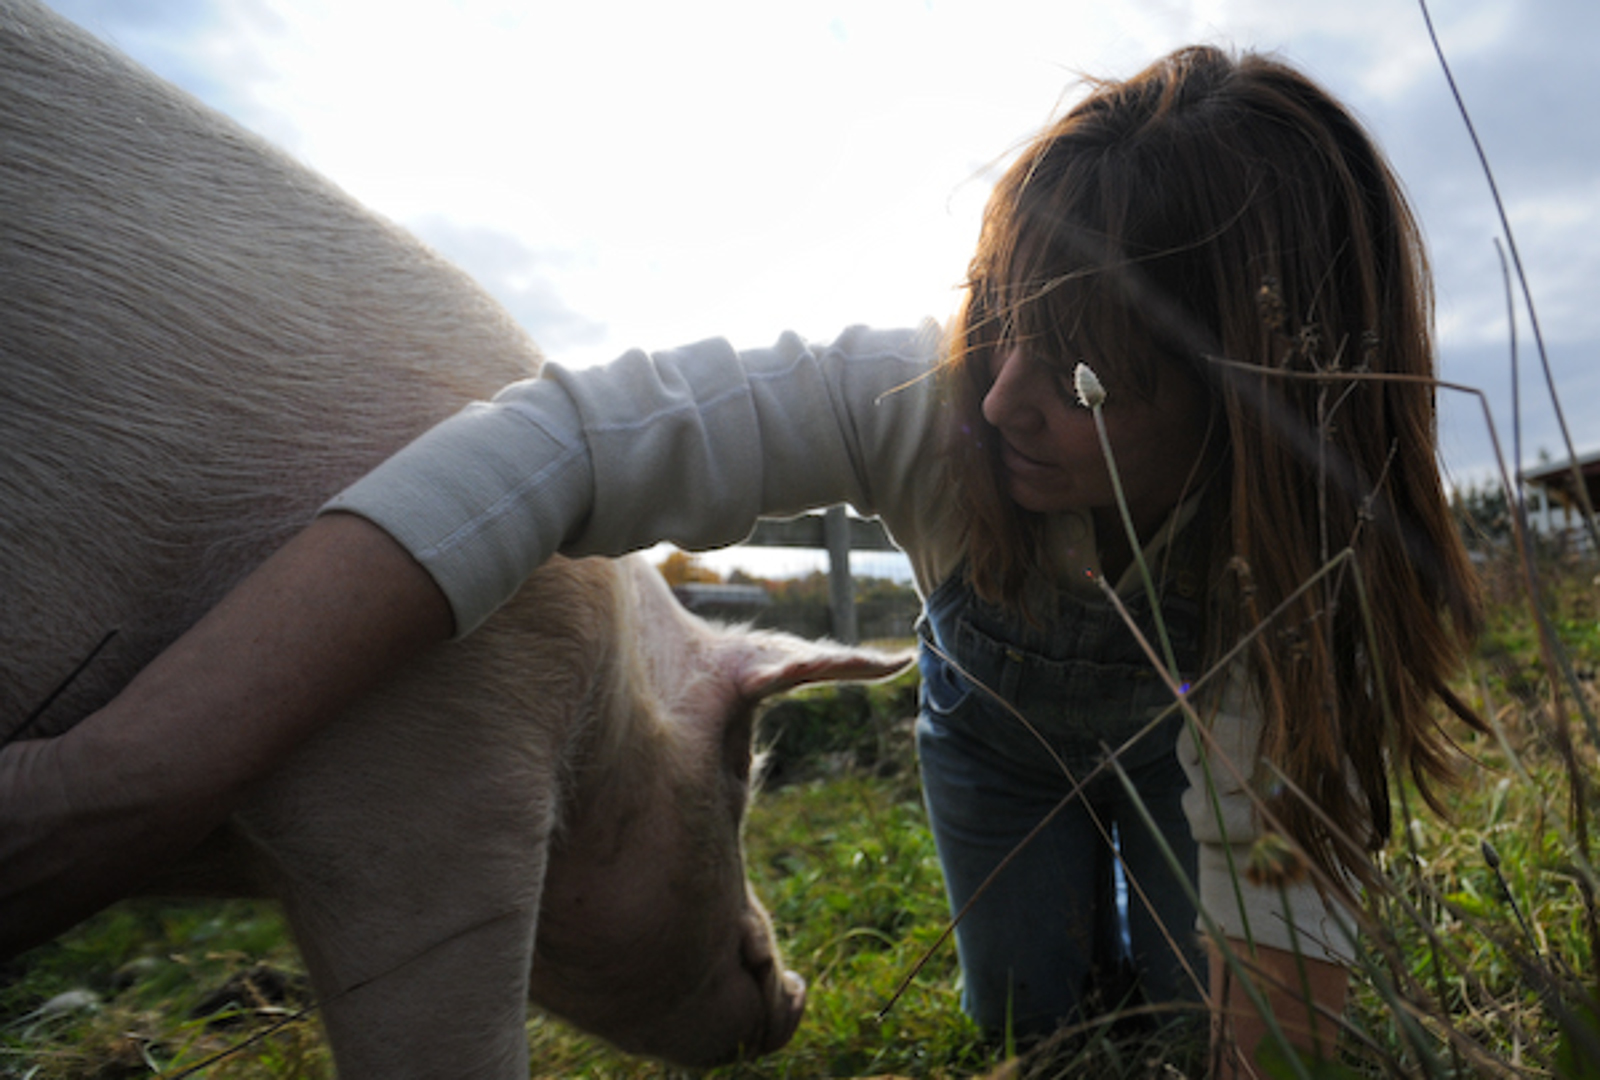 A Peak into the Life of a Farm Animal Whisperer